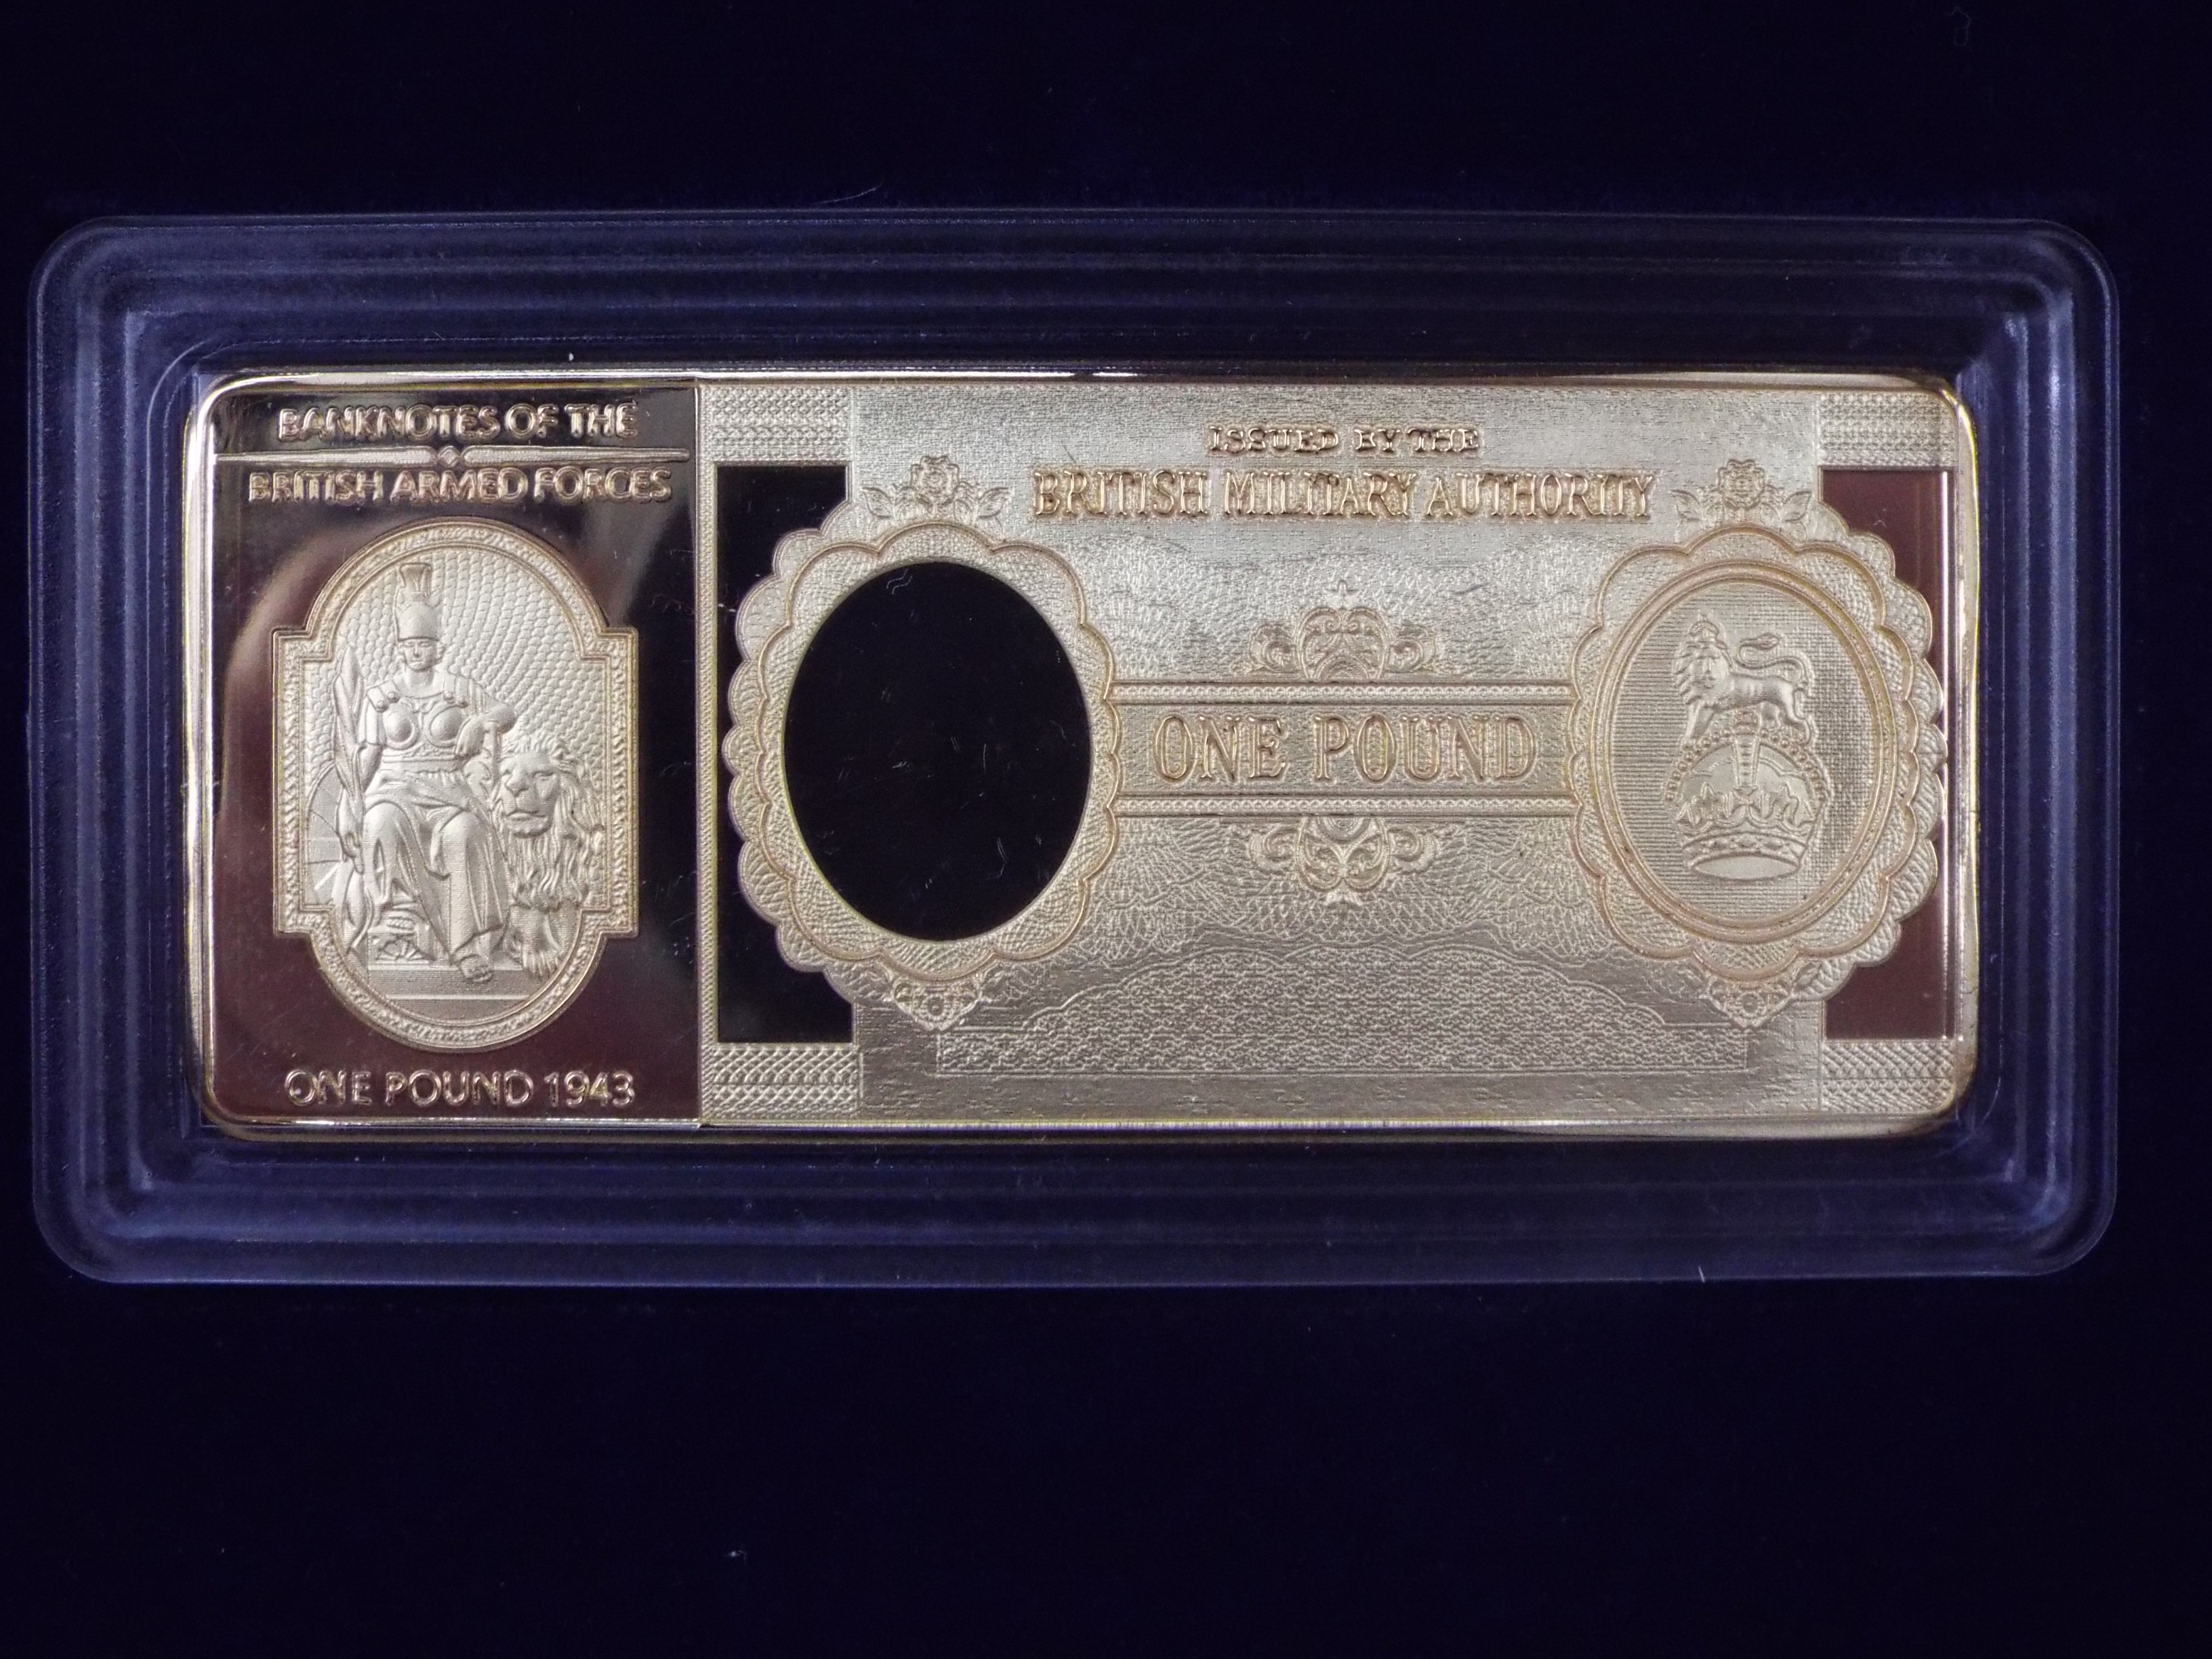 A limited edition, Windsor Mint, 24ct gold plated Banknotes Of The British Armed Forces set, - Image 8 of 9